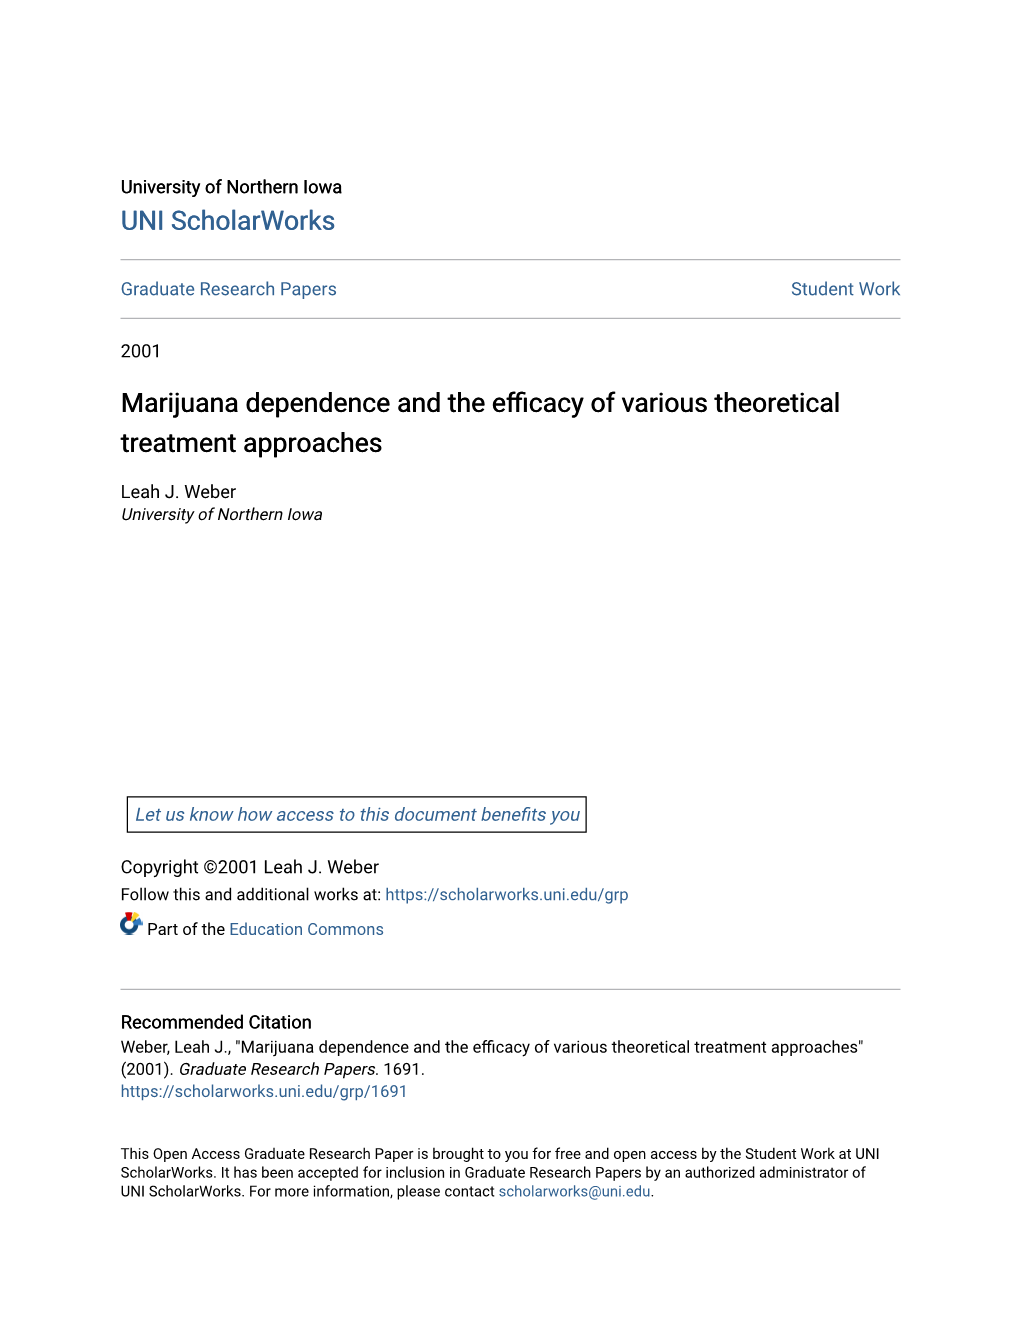 Marijuana Dependence and the Efficacy of Various Theoretical Treatment Approaches" (2001)